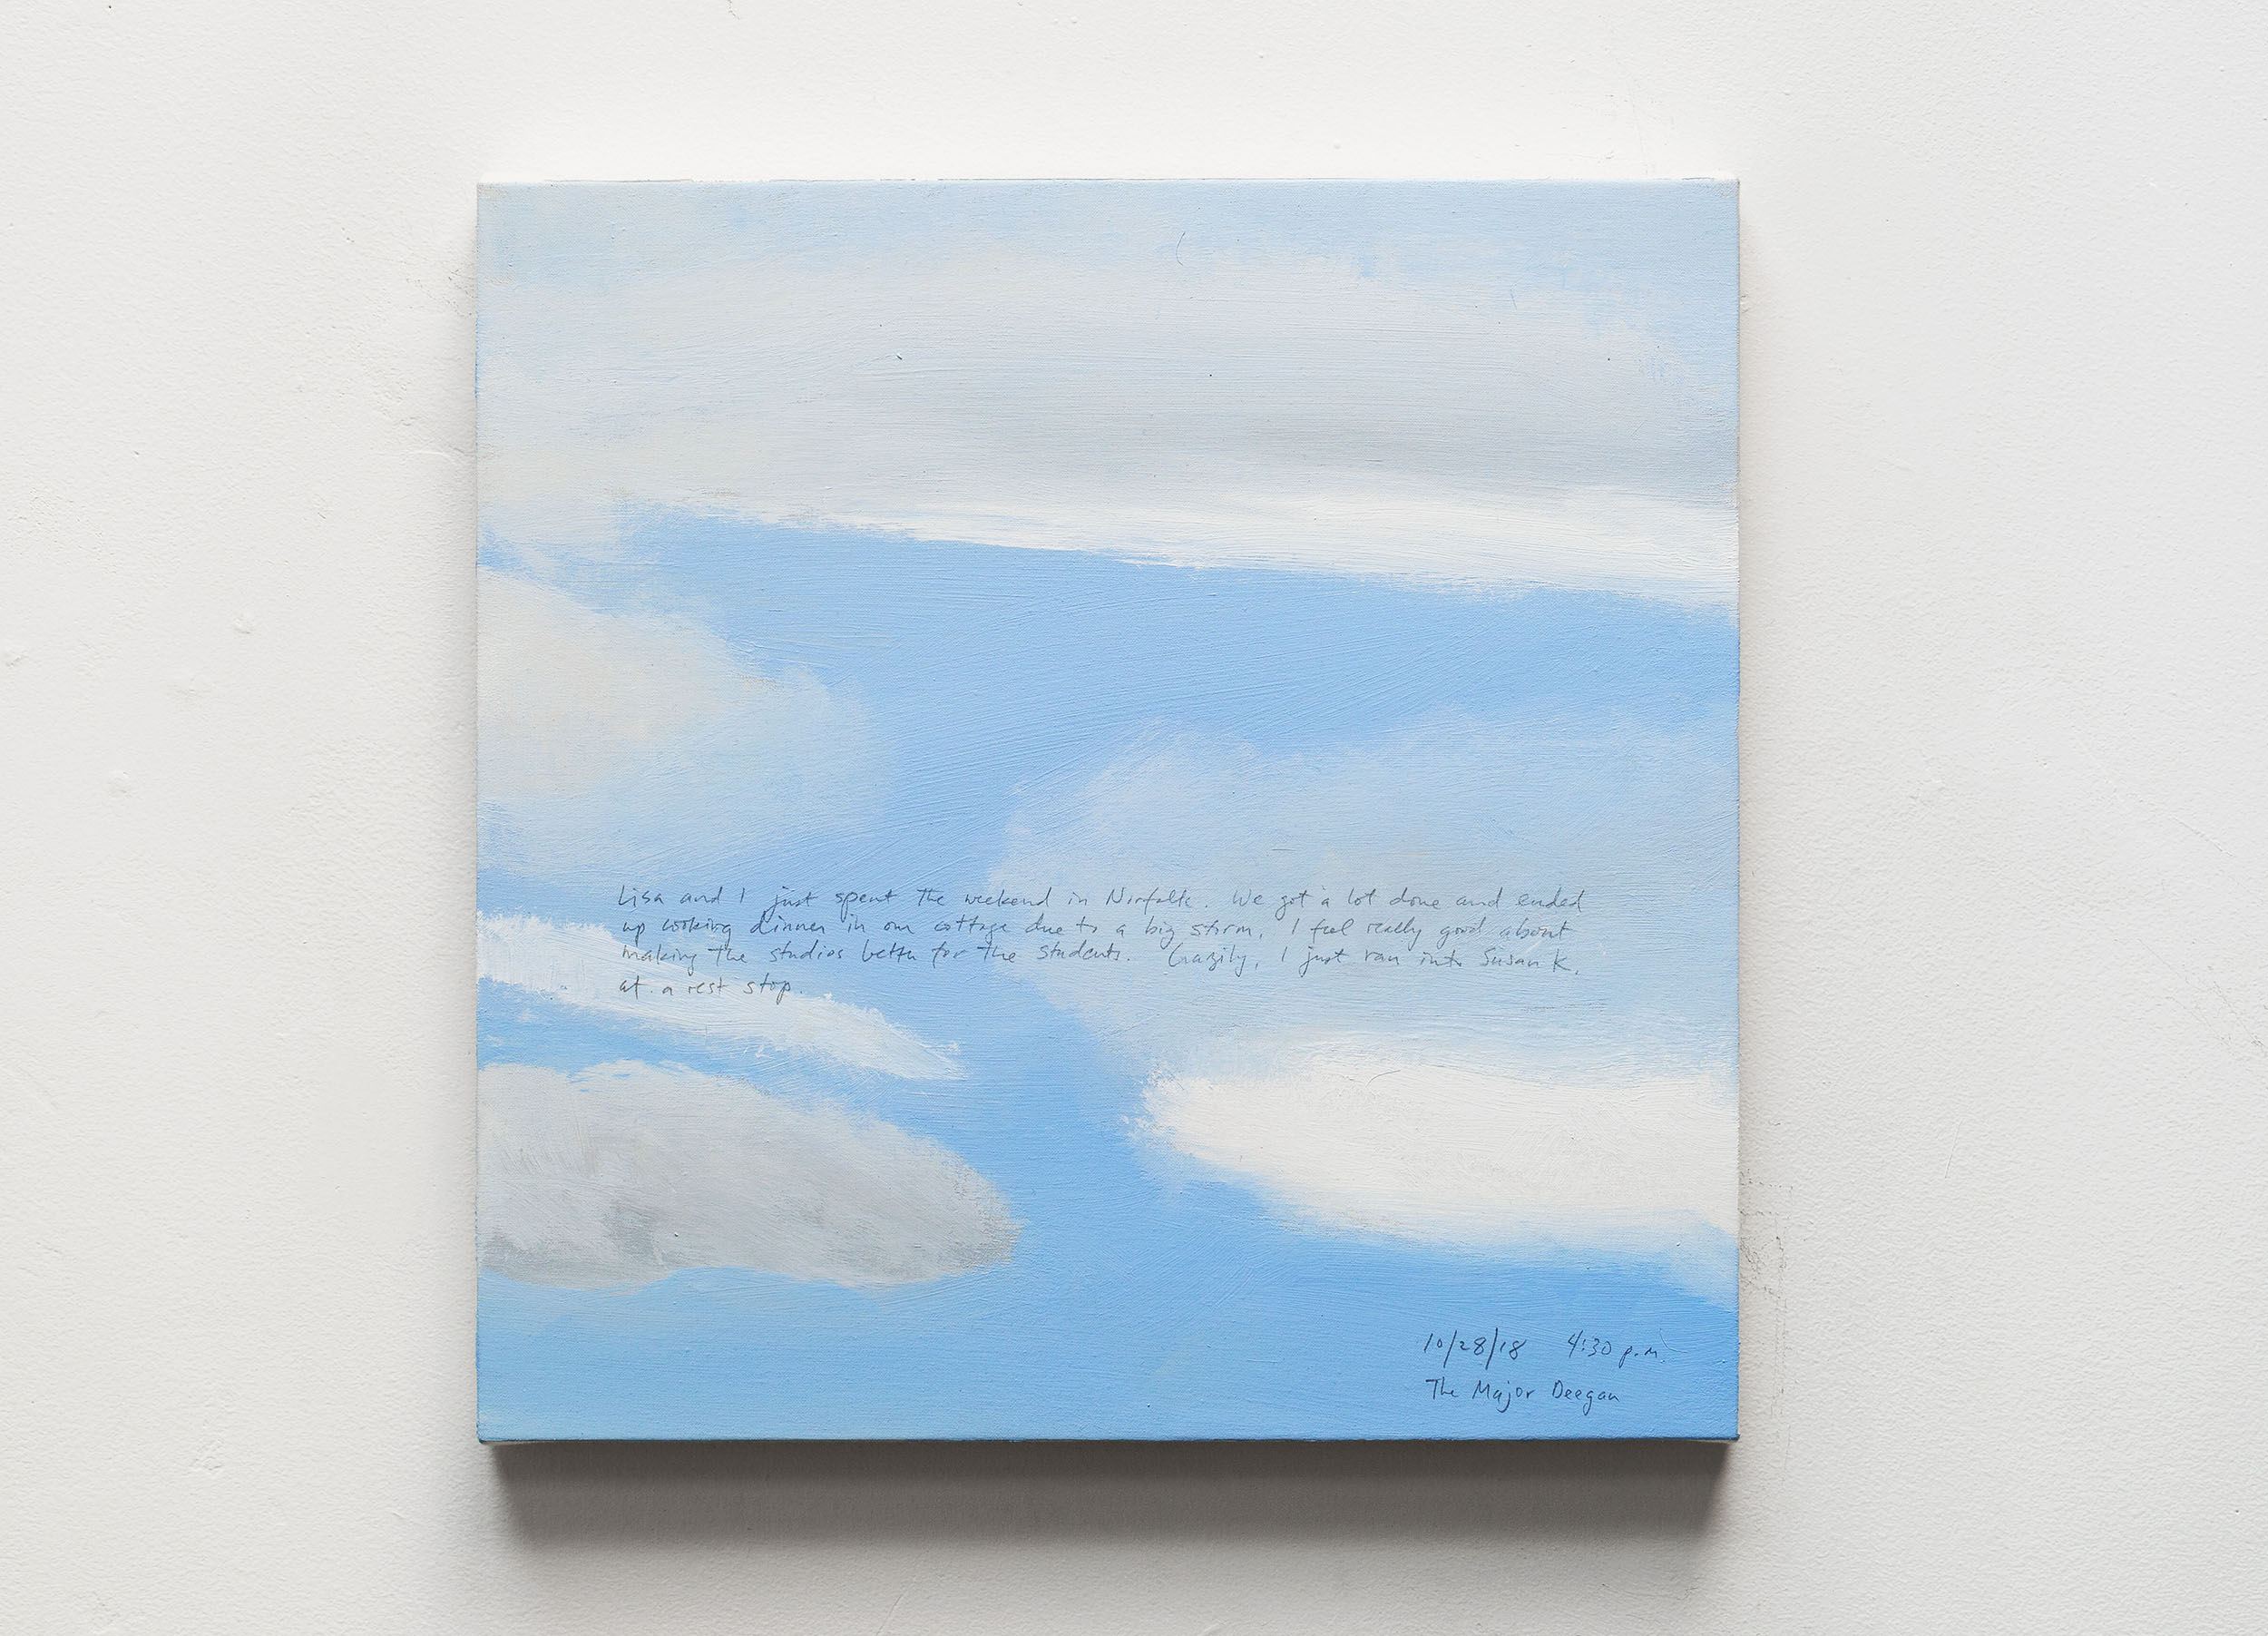 A 14 × 14 inch, acrylic painting of the sky. A journal entry is handwritten on the painting:

“Lisa and I just spent the weekend in Norfolk. We got a lot done and ended up cooking dinner in our cottage due to a big storm. I feel really good about making the studios better for the students. Crazily, I just ran into Susan K. at a rest stop.

10/28/18 4:30 p.m.
The Major Deegan”